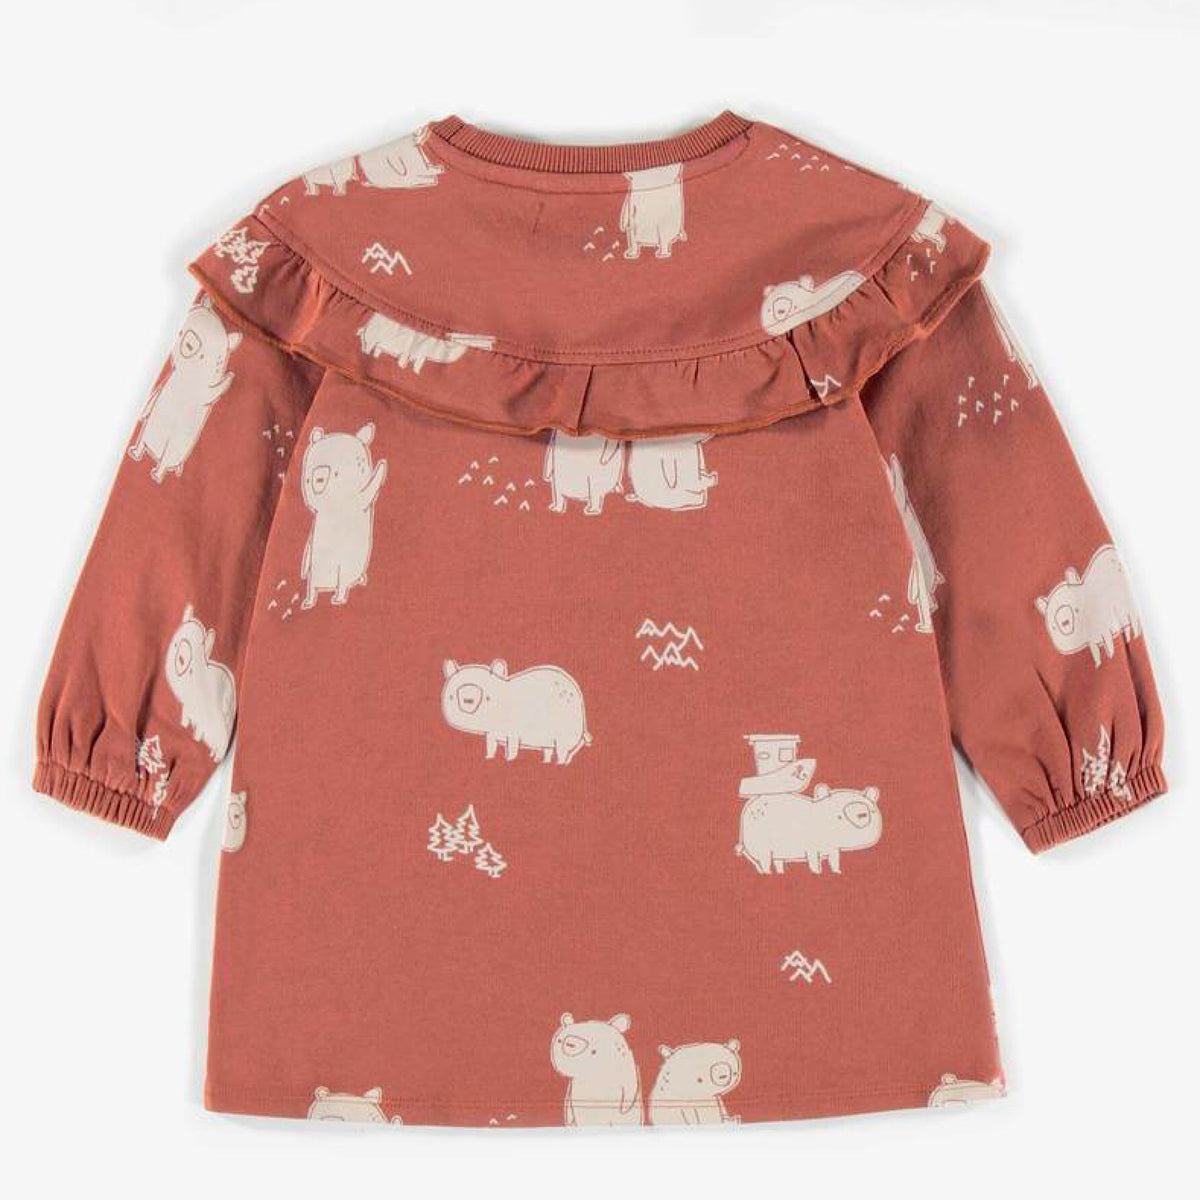 Bear Patterned Dress With Frills